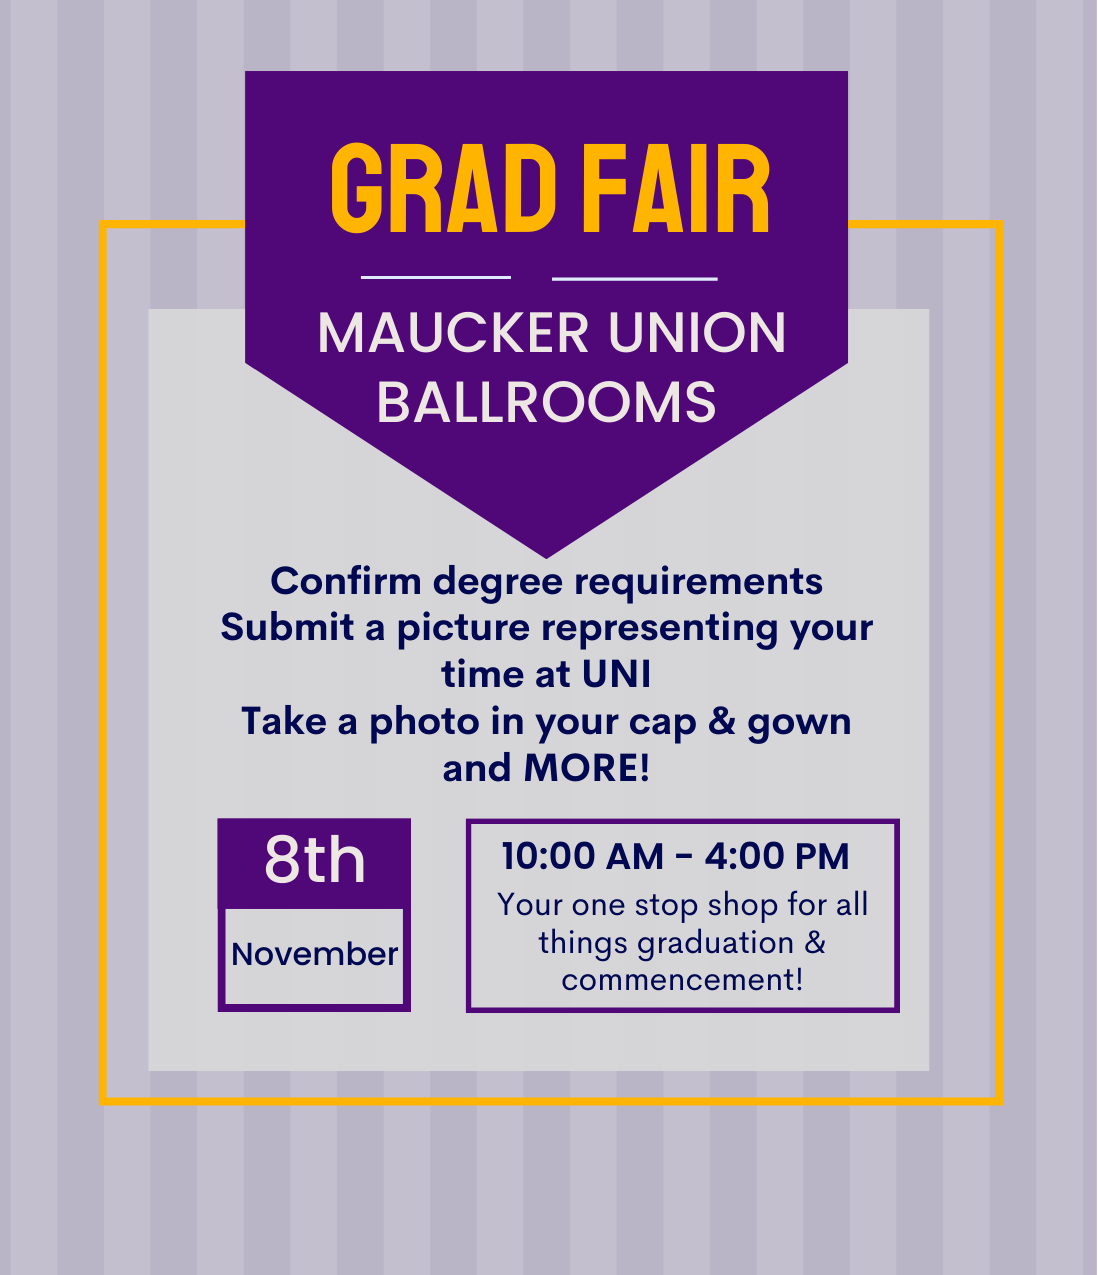 Graduation Fair will take place on Wednesday, November 8th from 10:00 am to 4:00pm in the Maucker Union Ballrooms.  At Graduation Fair students will be able to confirm their degree requirements, submit a picture representing your time at UNI, take a photo in your cap & gown and more!